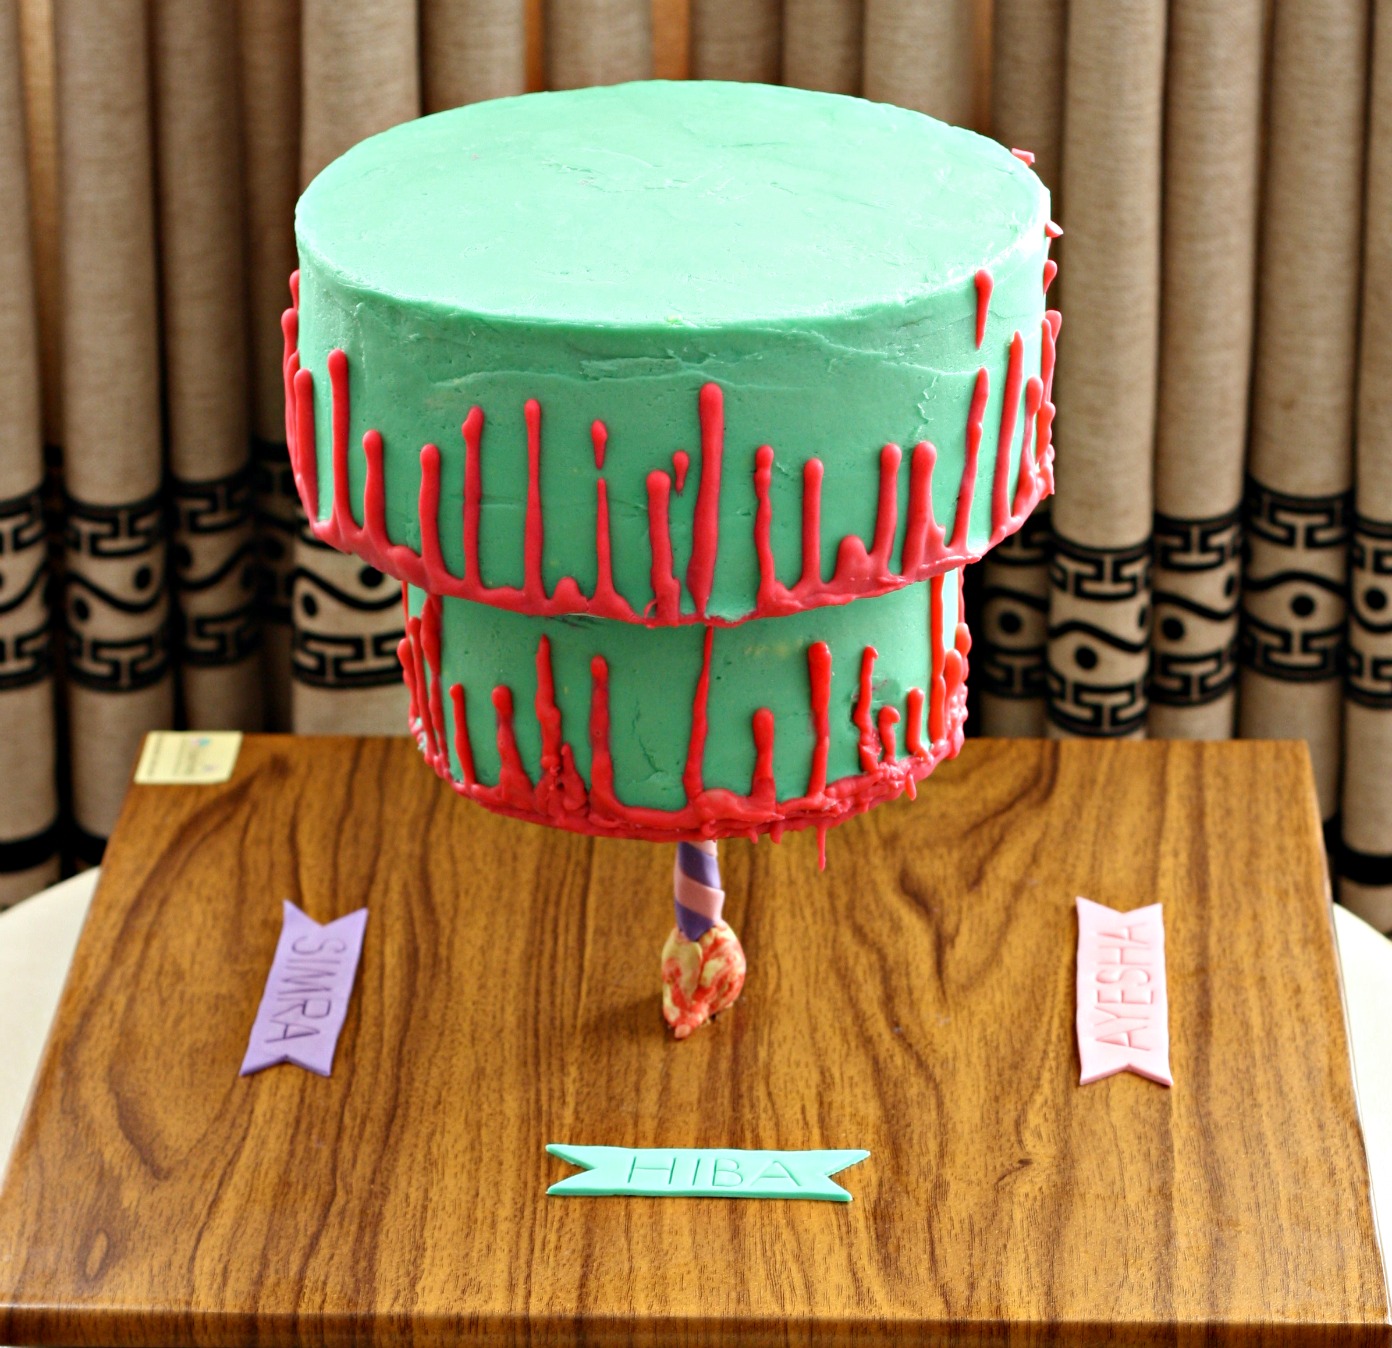 A cake sitting on top of a table